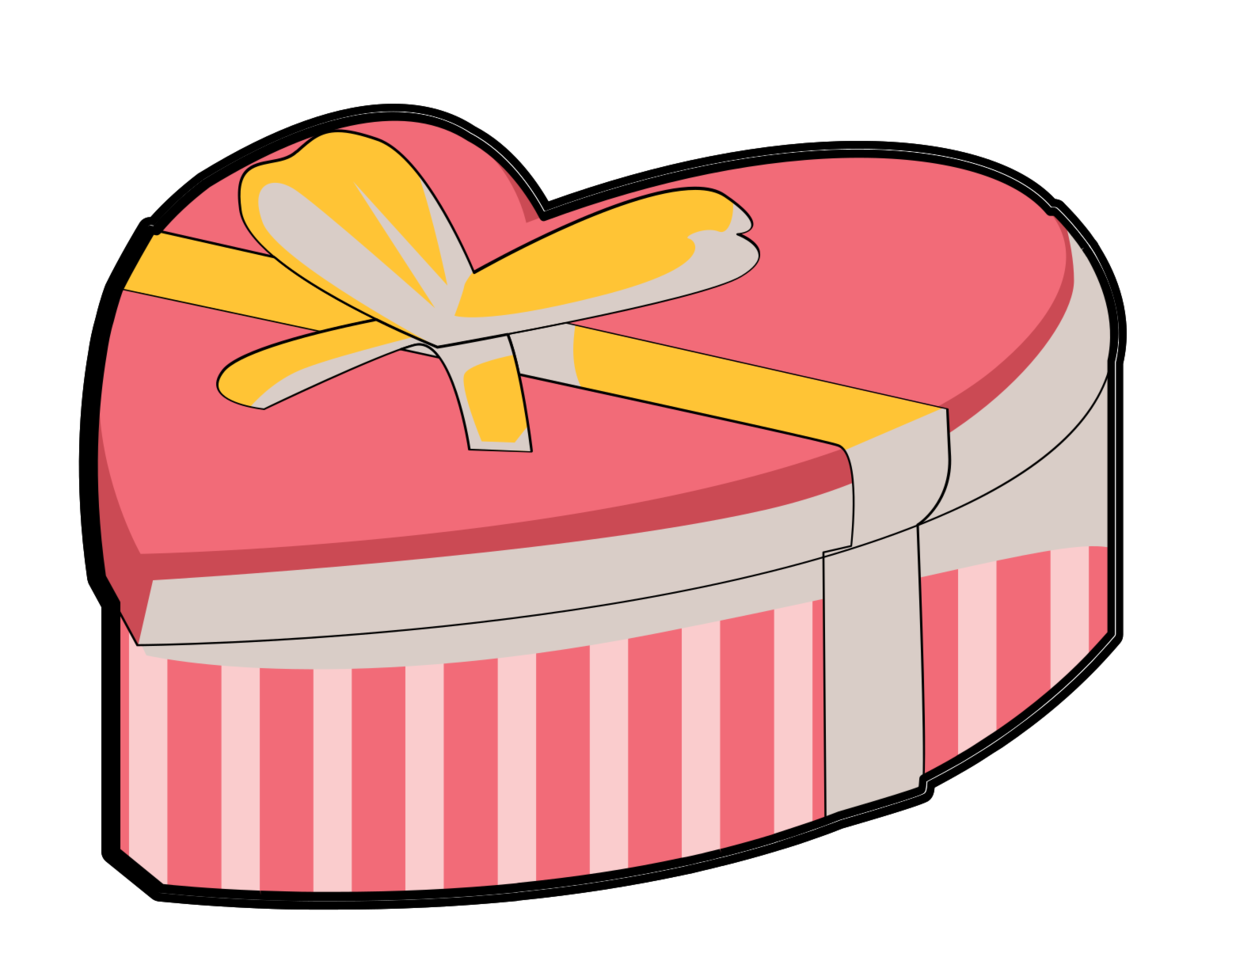 Download PNG image - Gift Heart Box PNG Image 